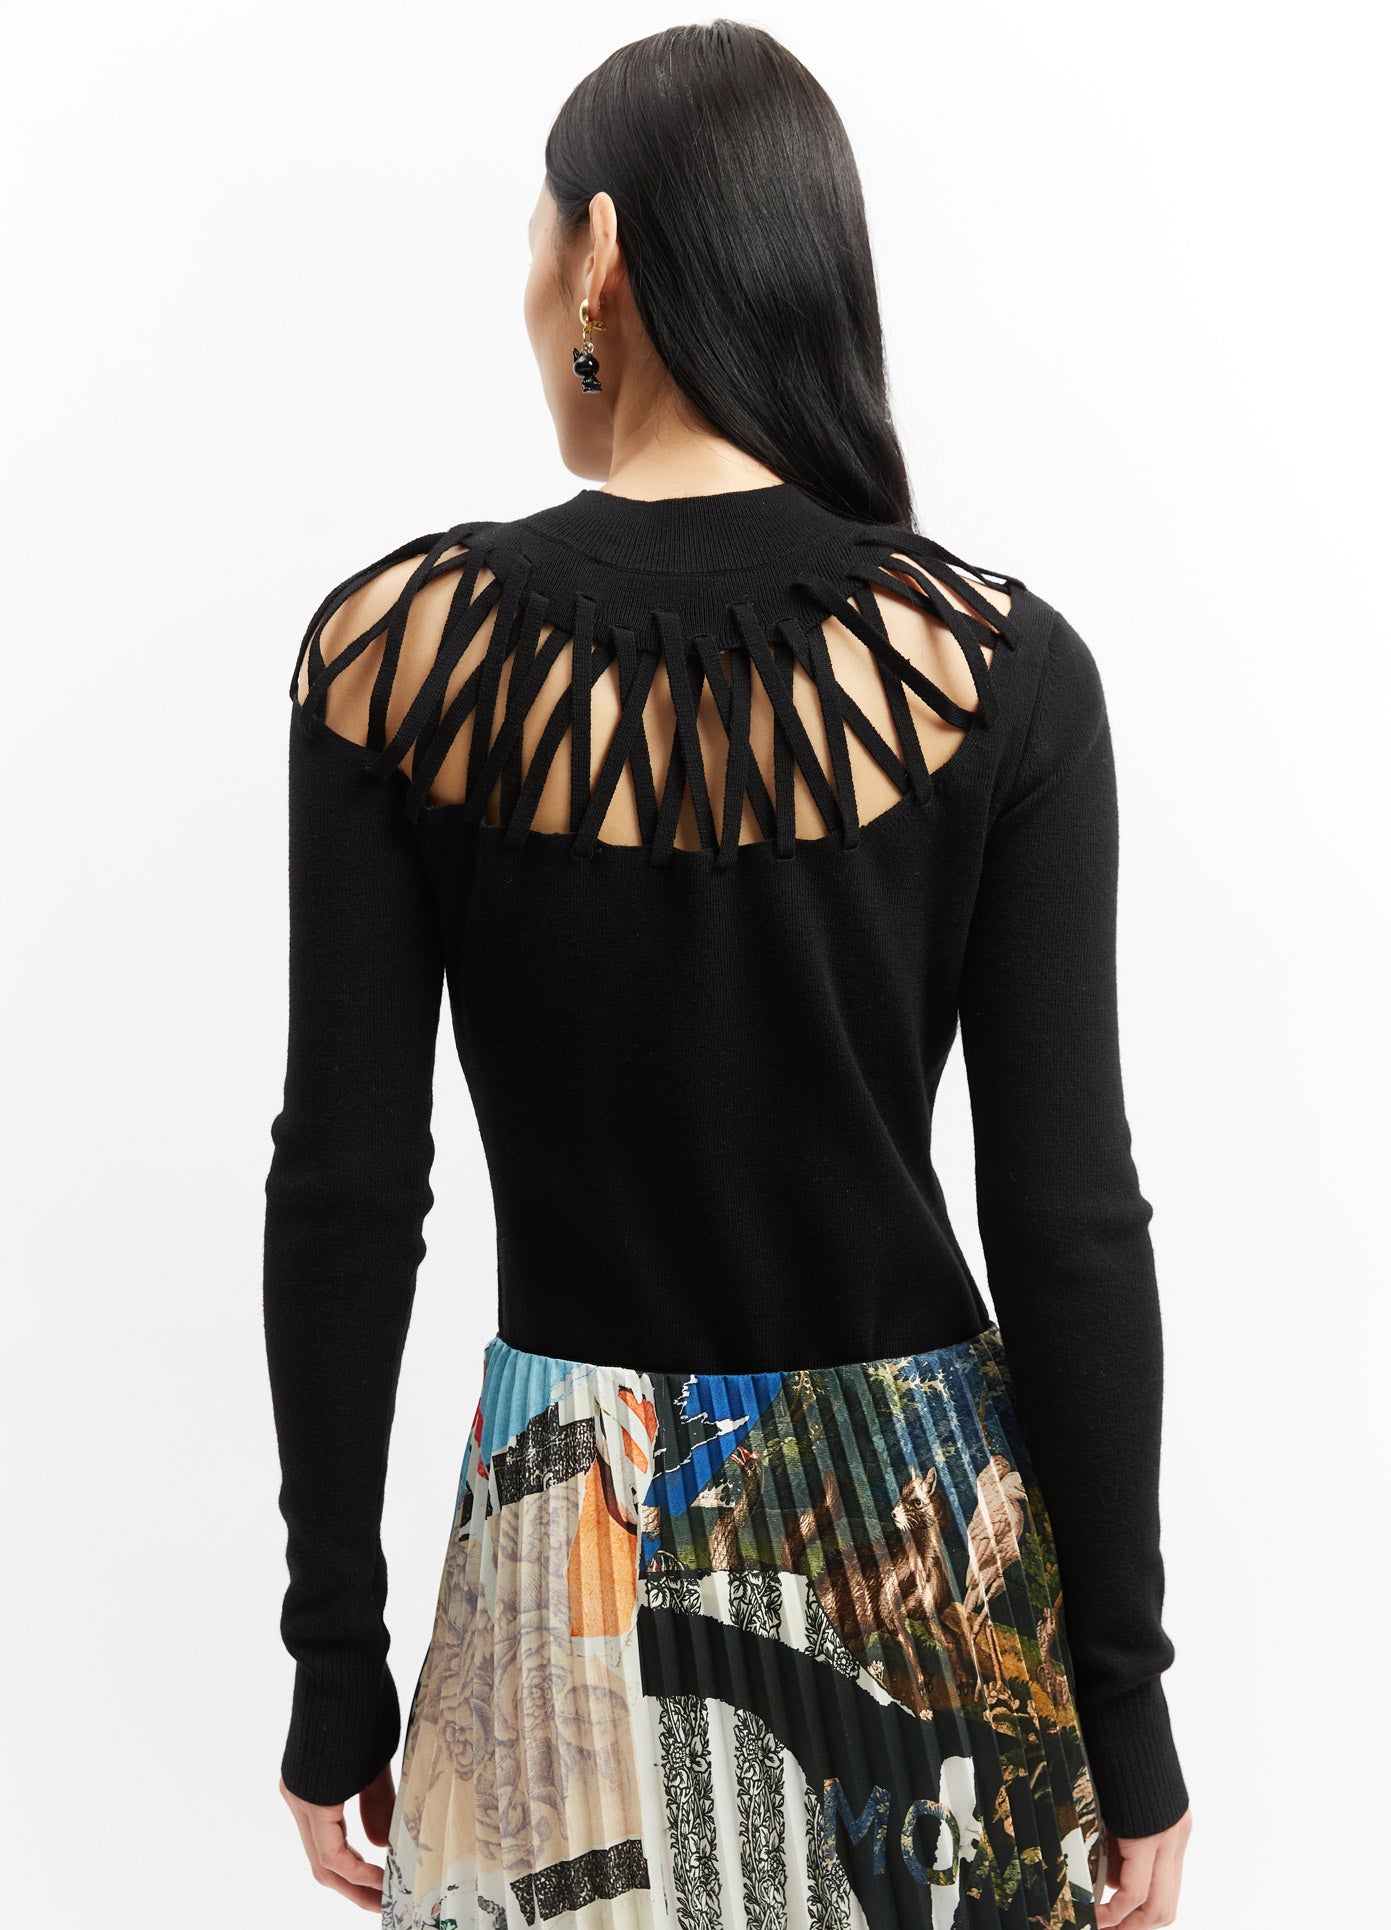 MONSE Strappy Knit Top in Black on Model Back View